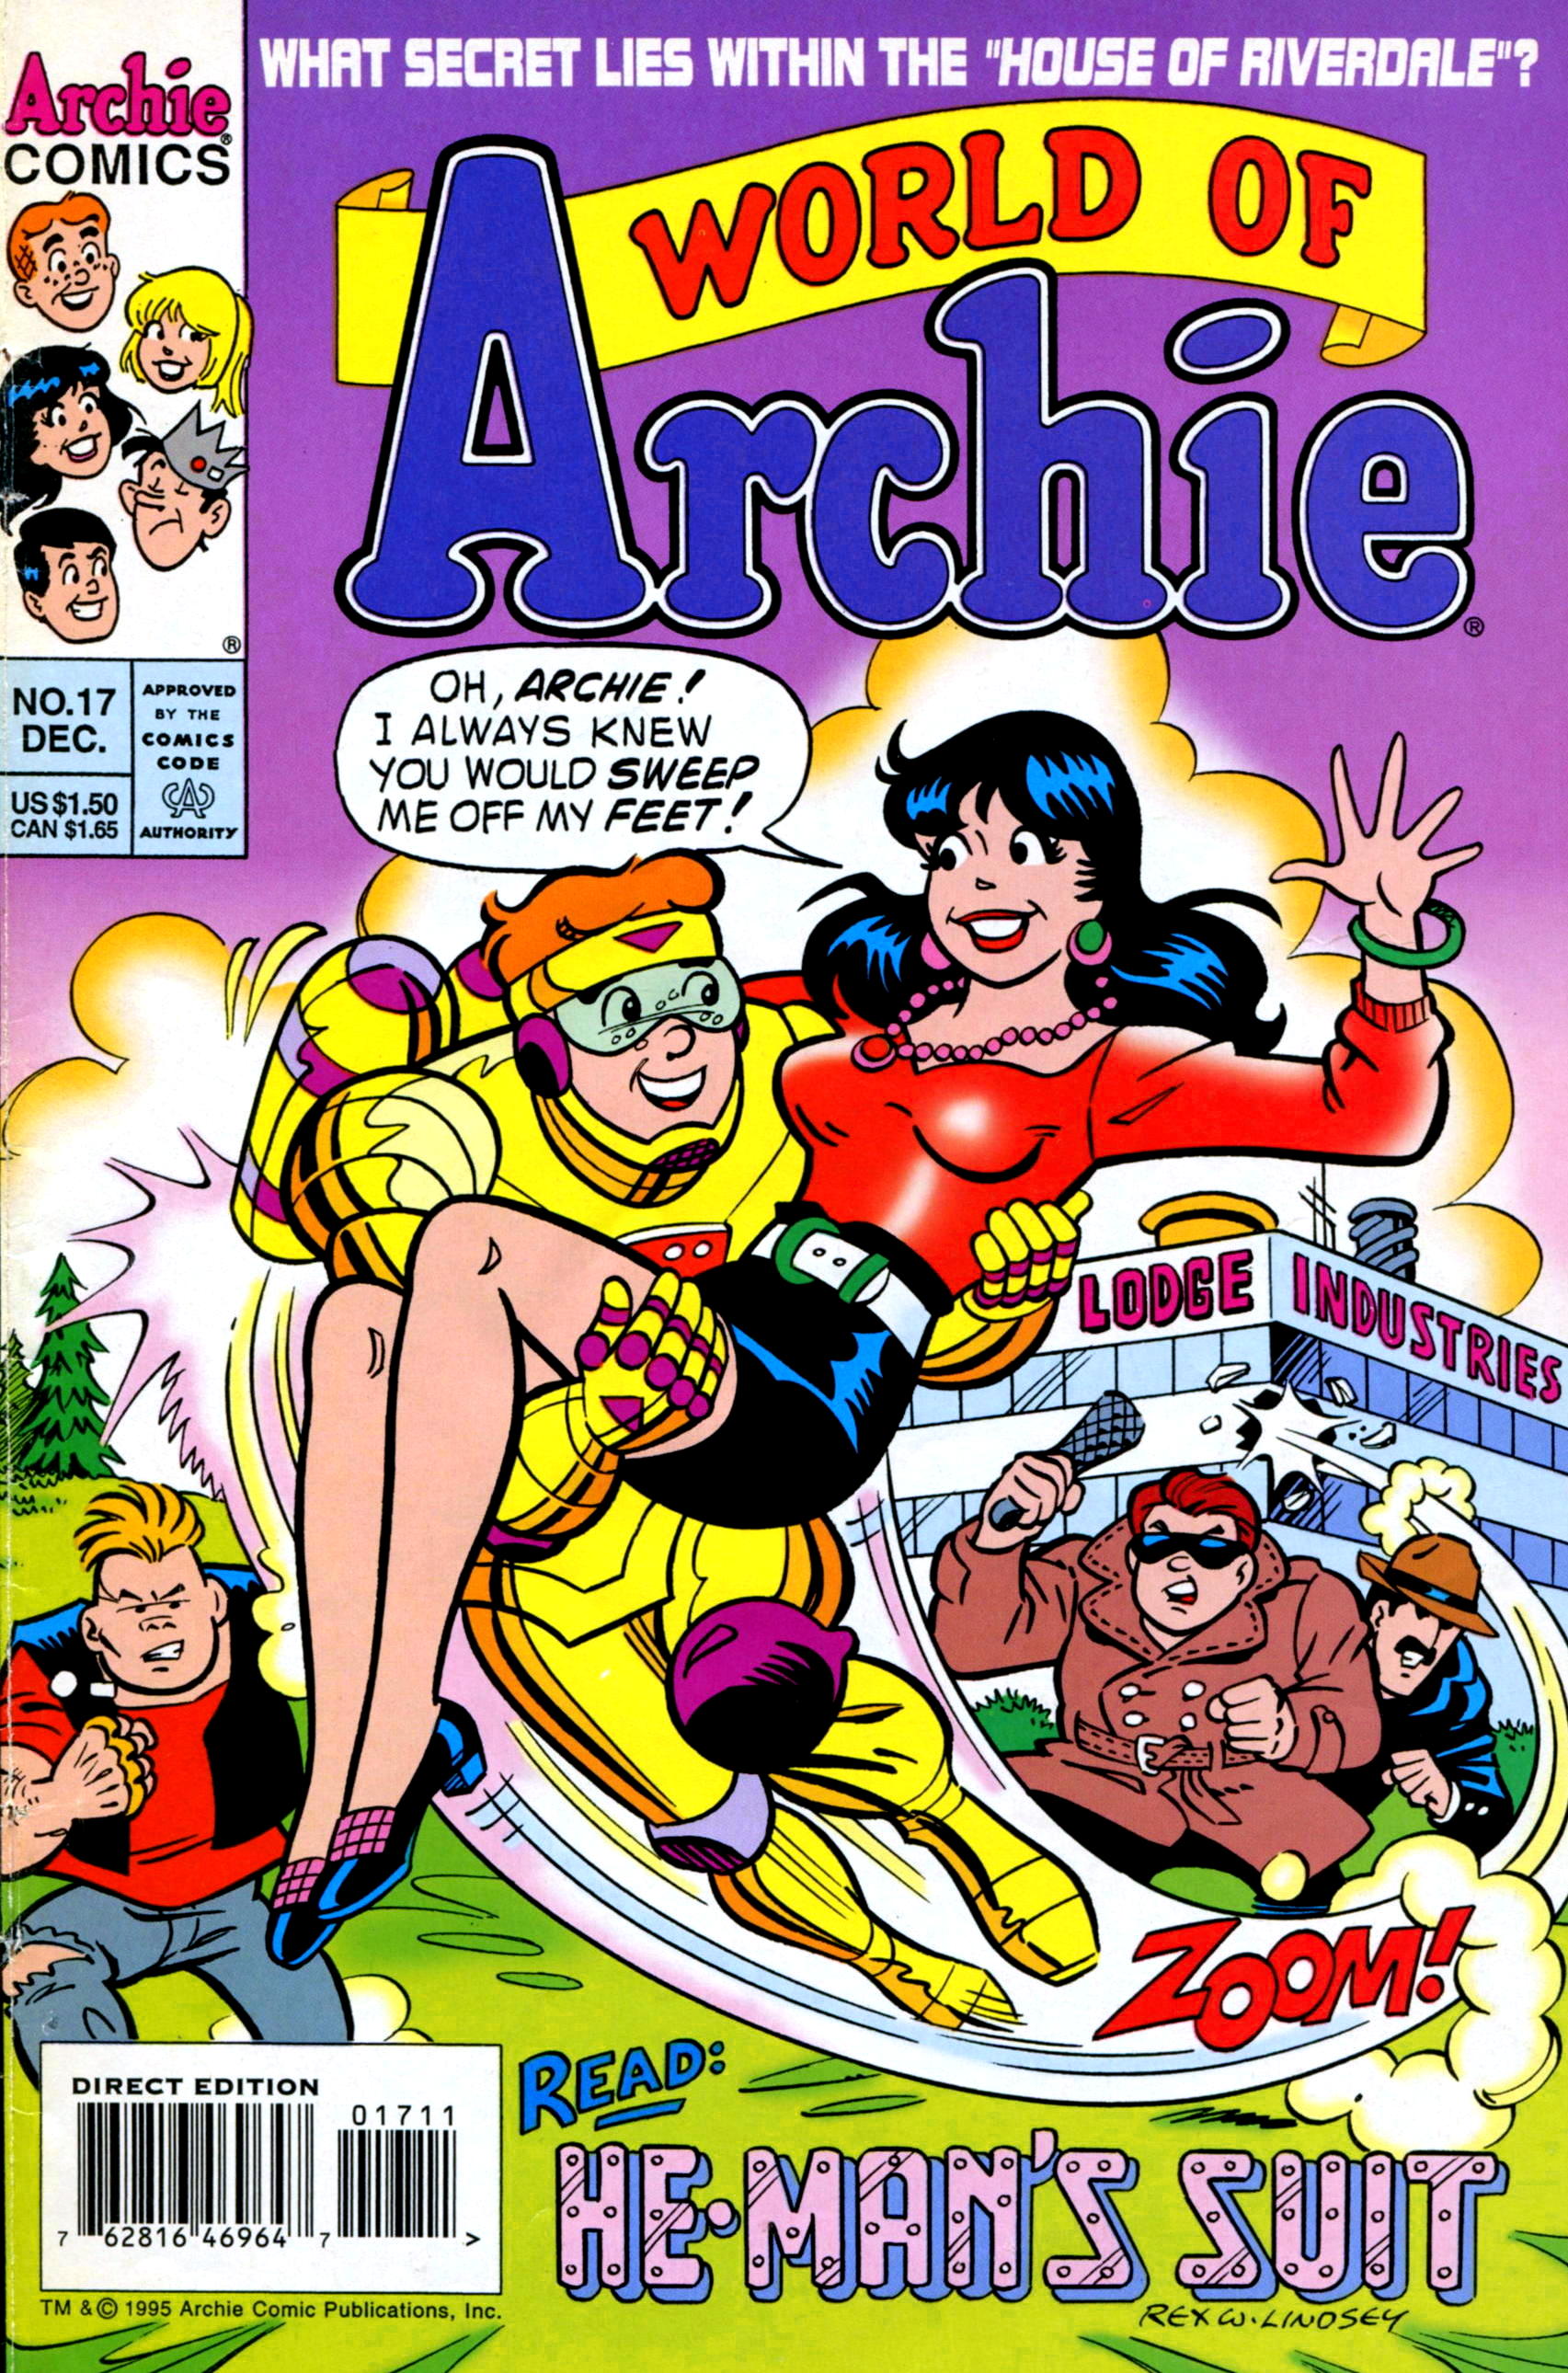 Read online World of Archie comic -  Issue #17 - 1